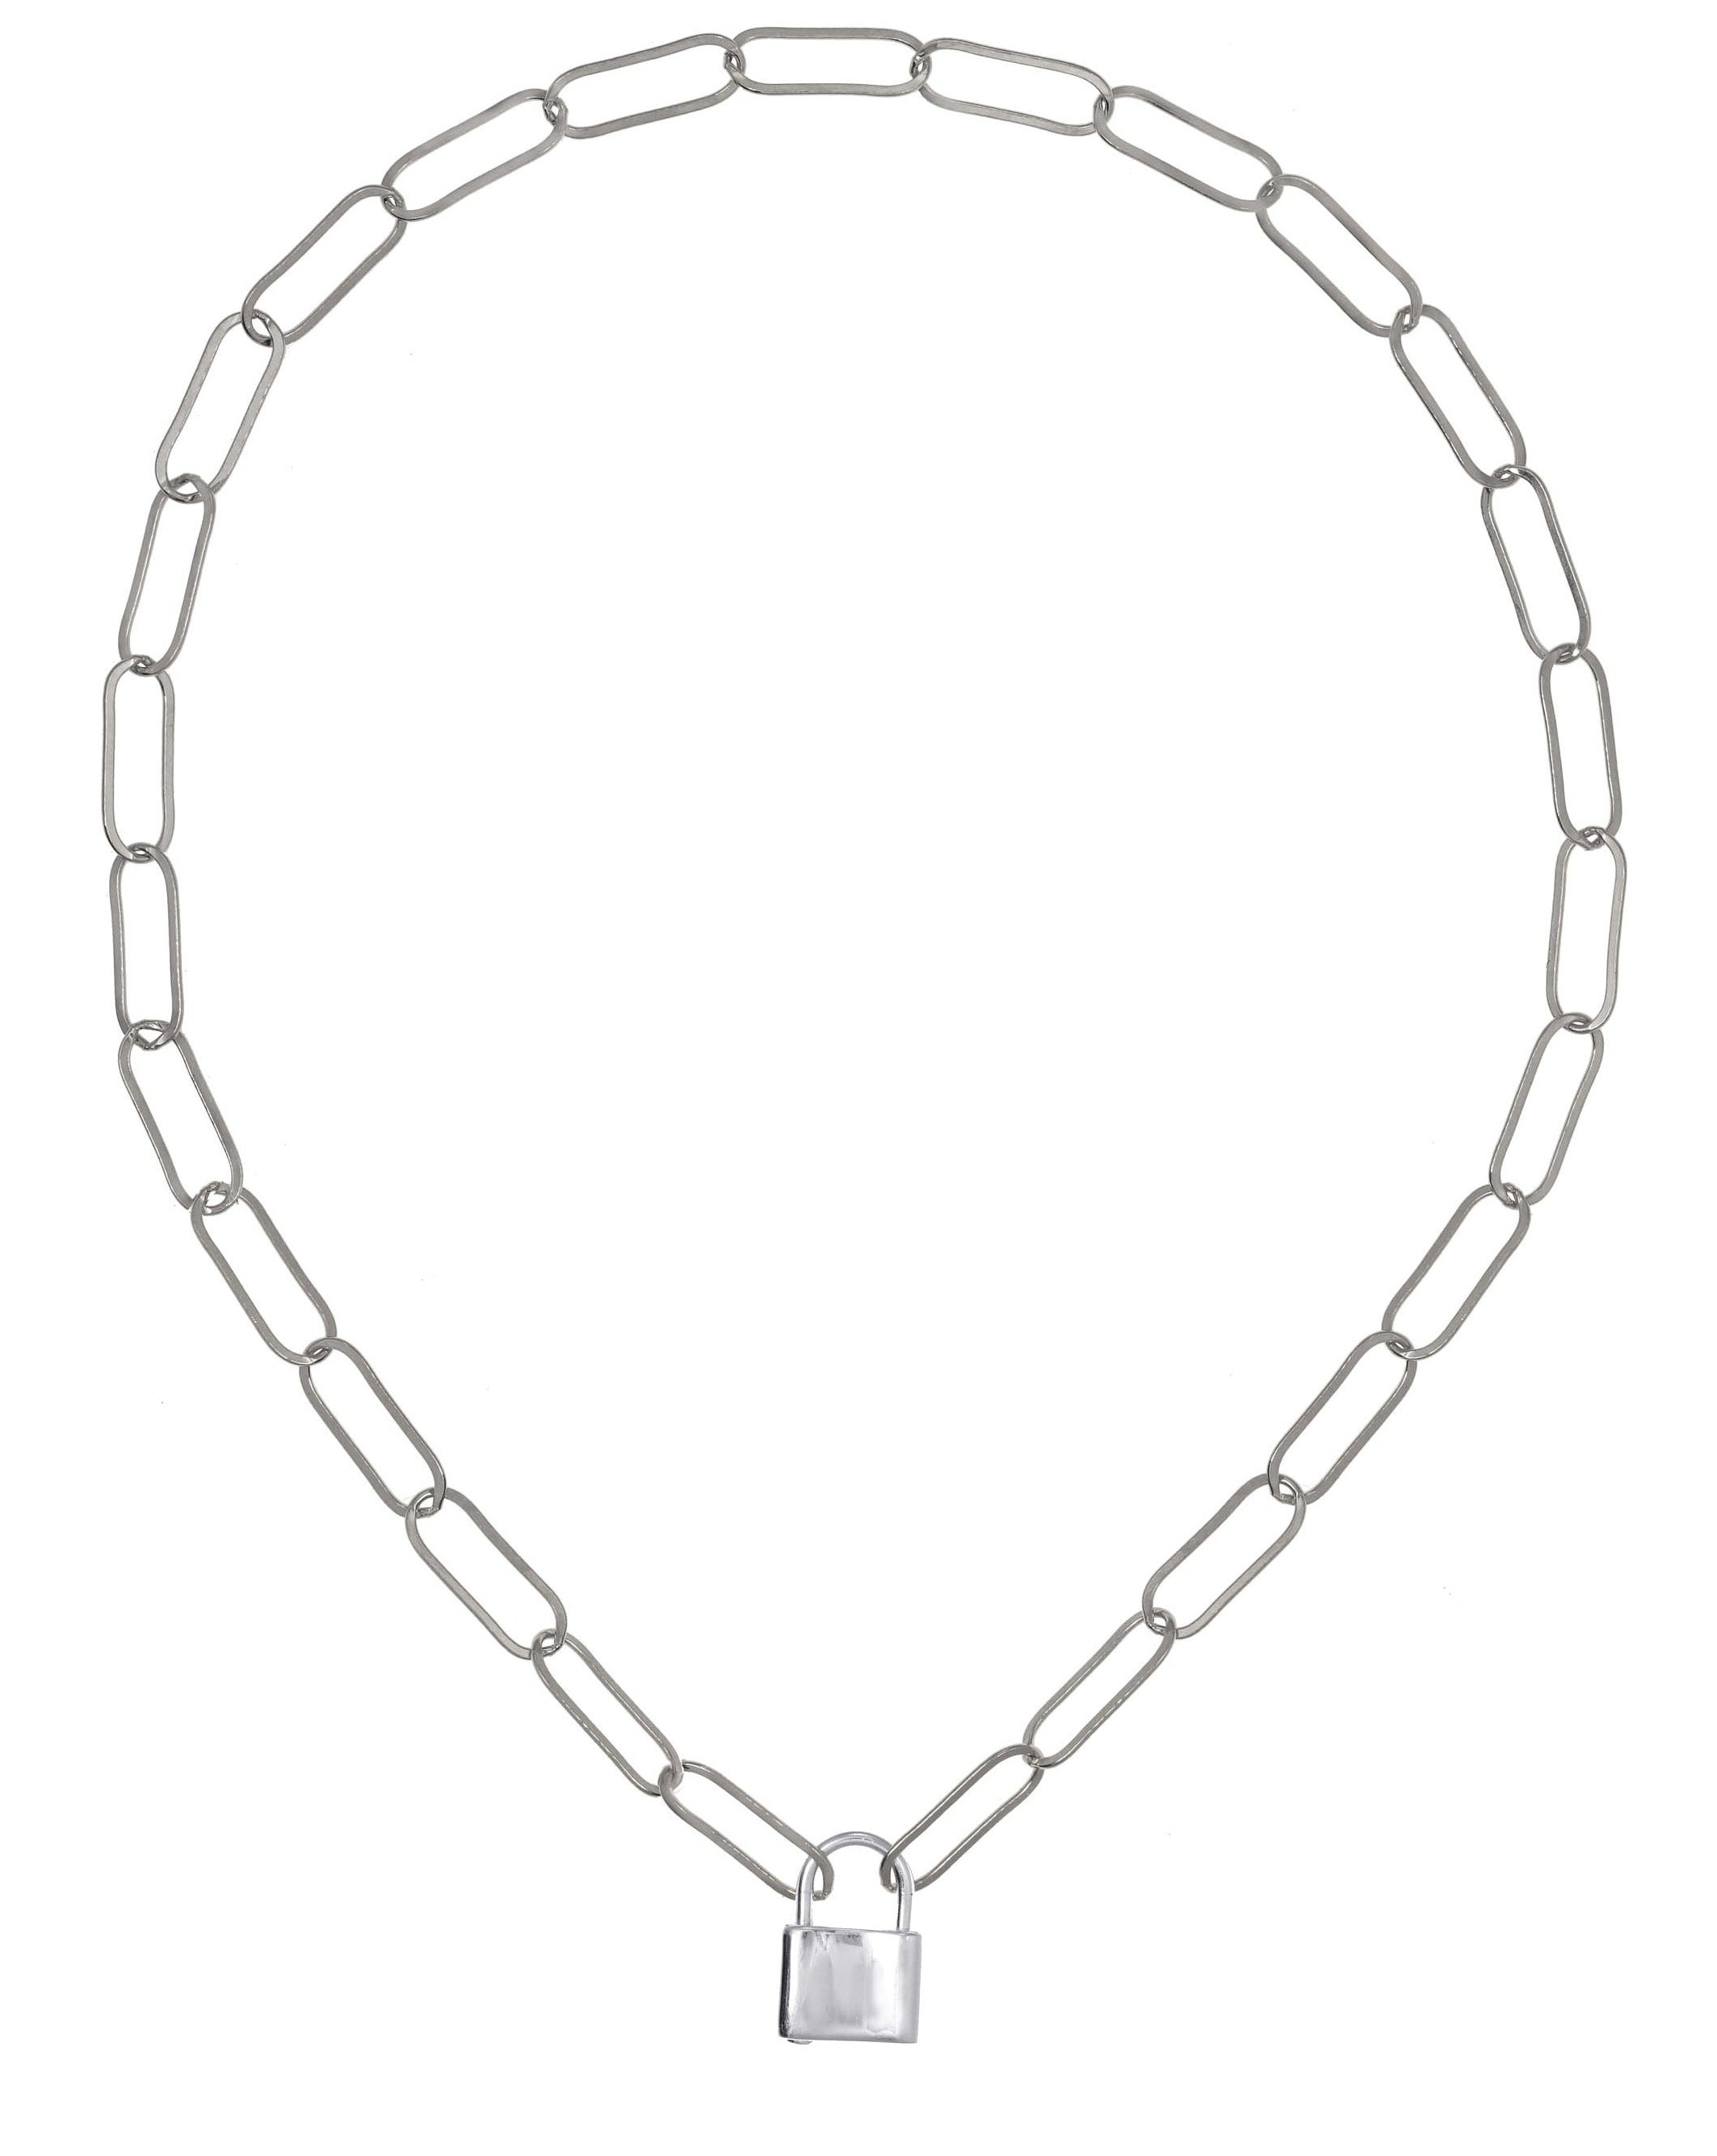 Locklyn Necklace by KOZAKH. A 15 inches long paperclip style chain necklace, crafted in Sterling Silver, featuring a Sterling Silver padlock closure.